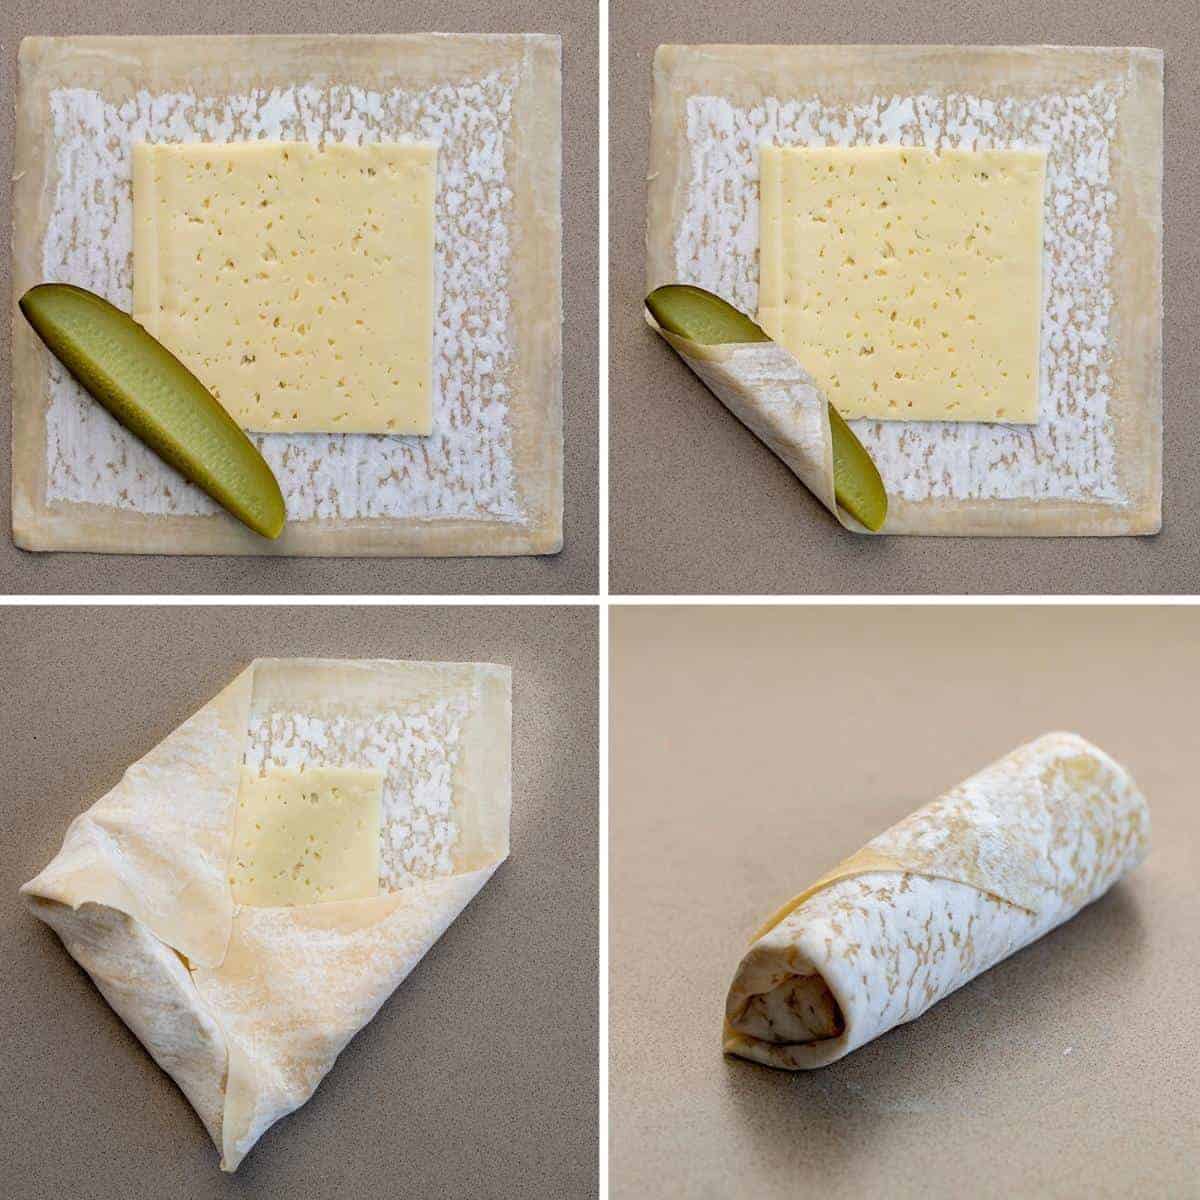 Process for how to Wrap an Air Fryer Dill Pickle Eggroll in Wonton Wrapper